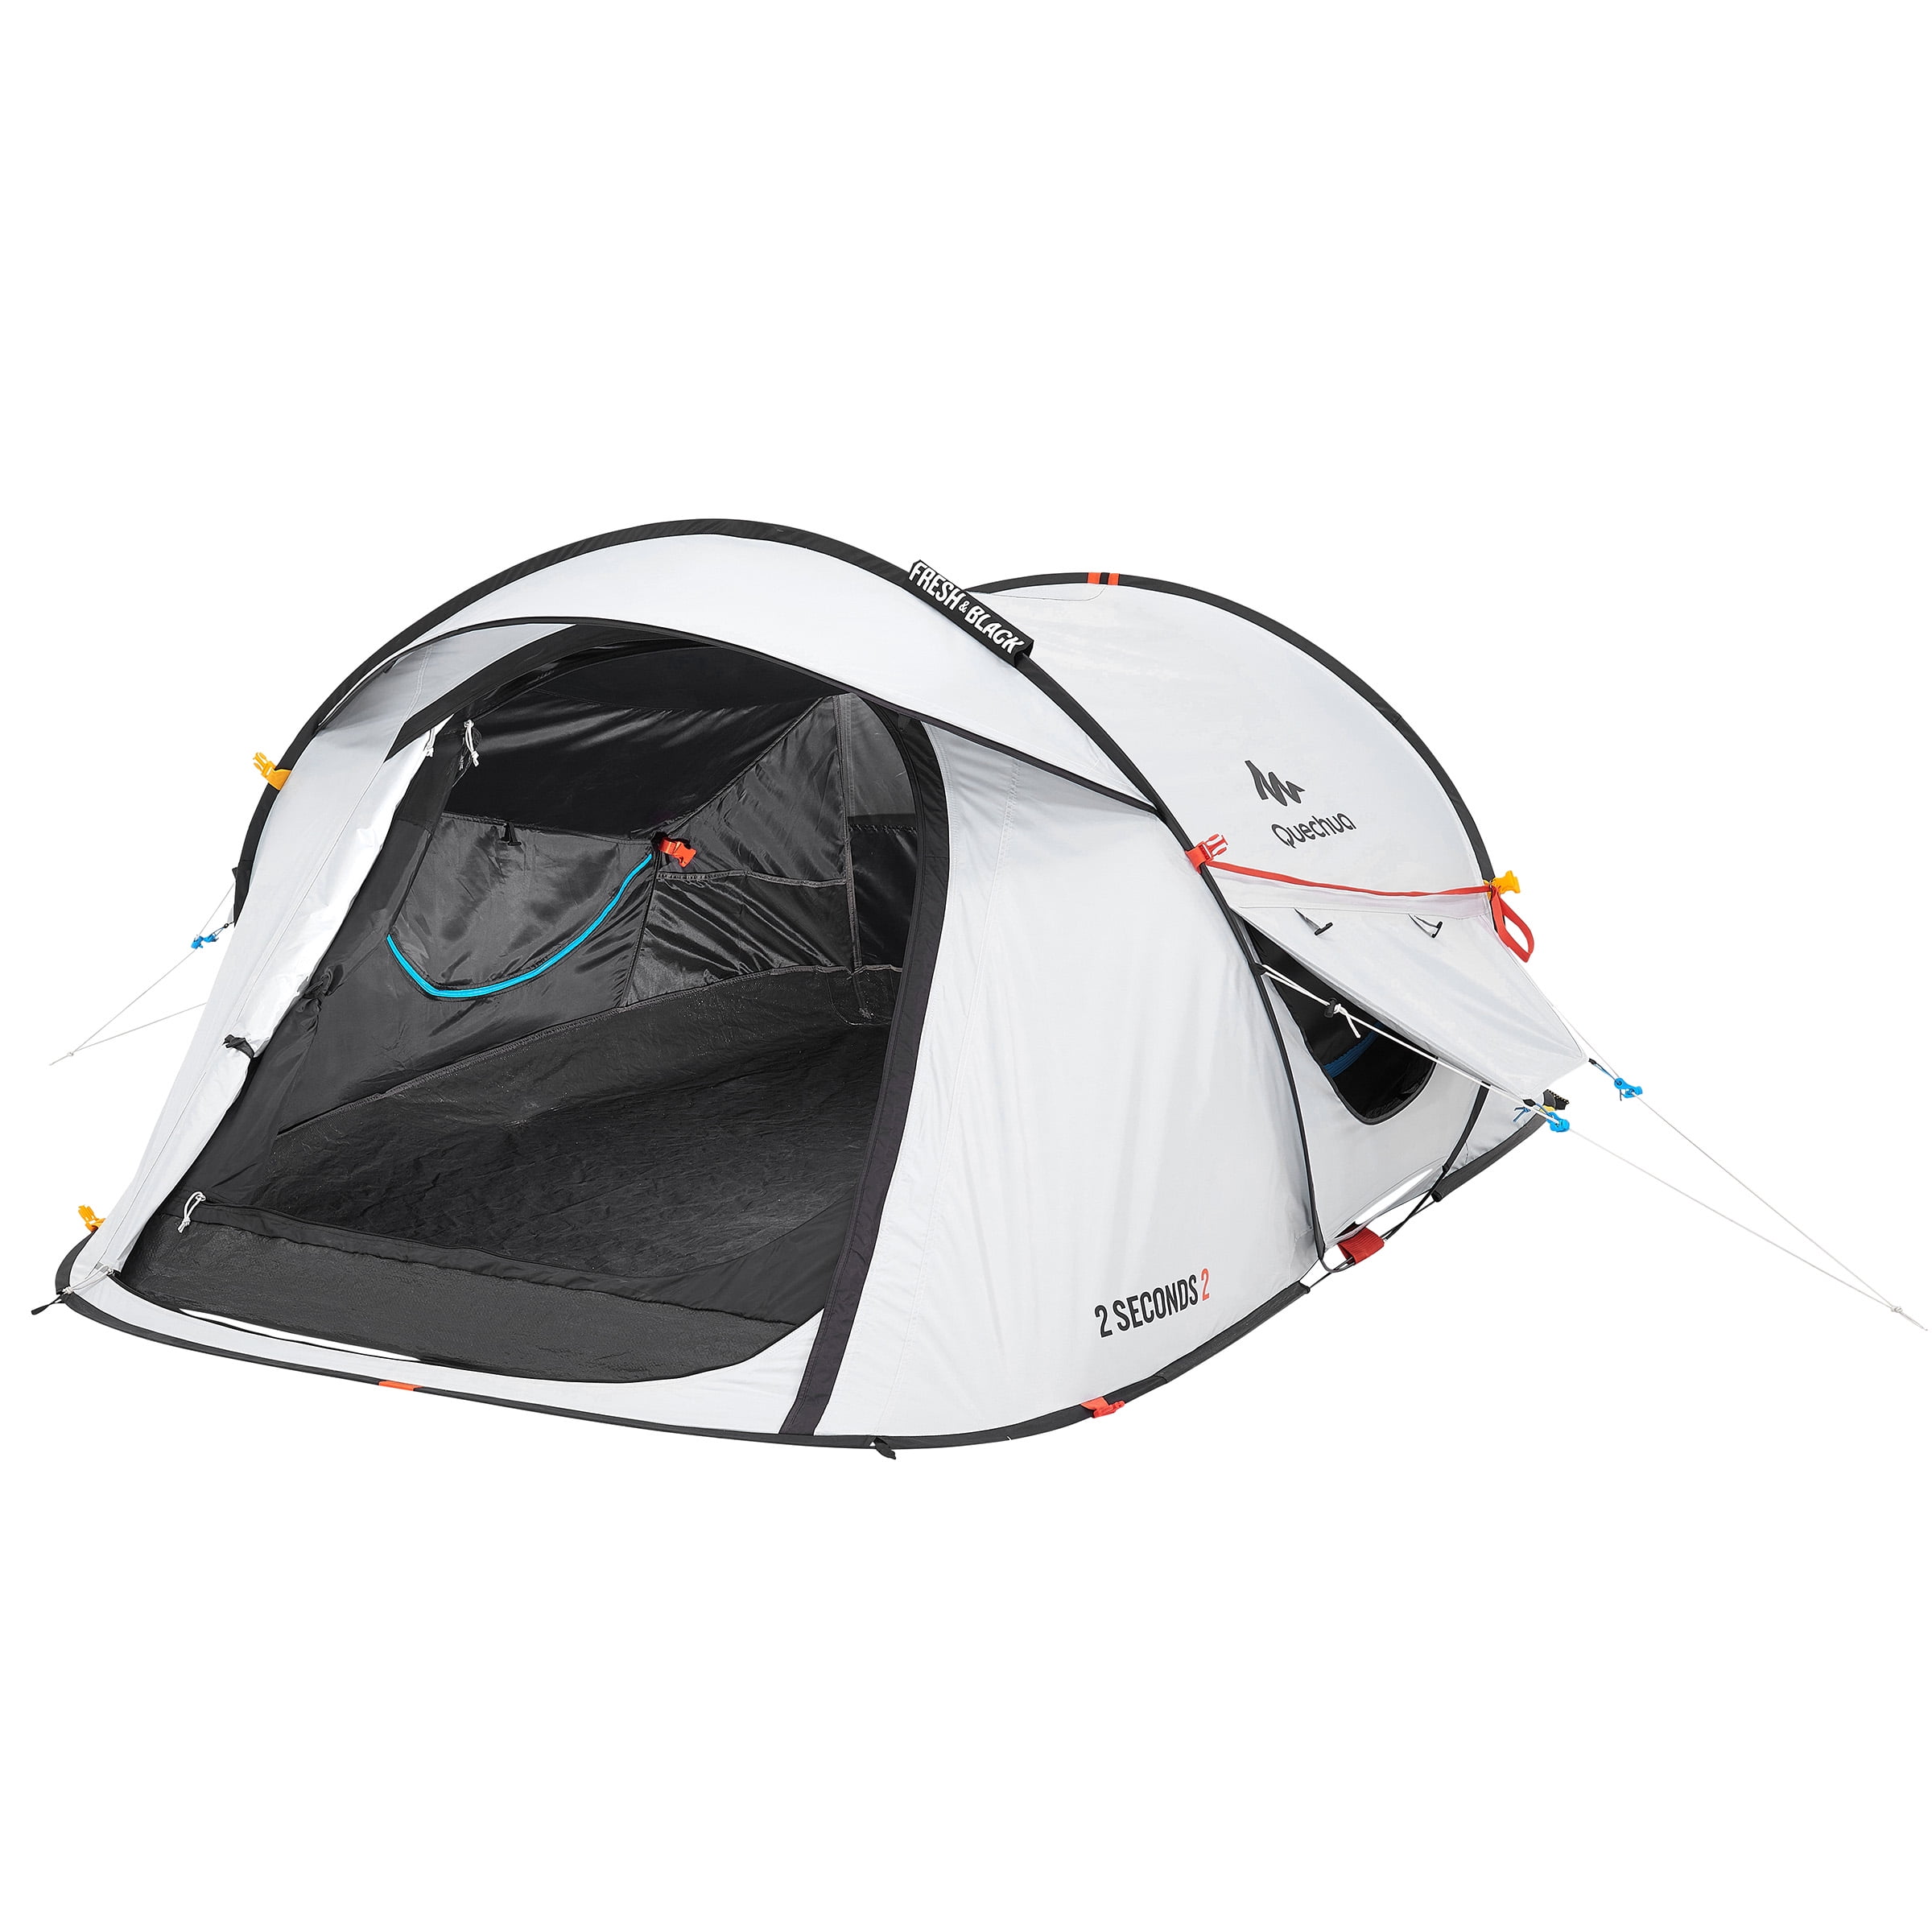 2 seconds fresh & black camping tent